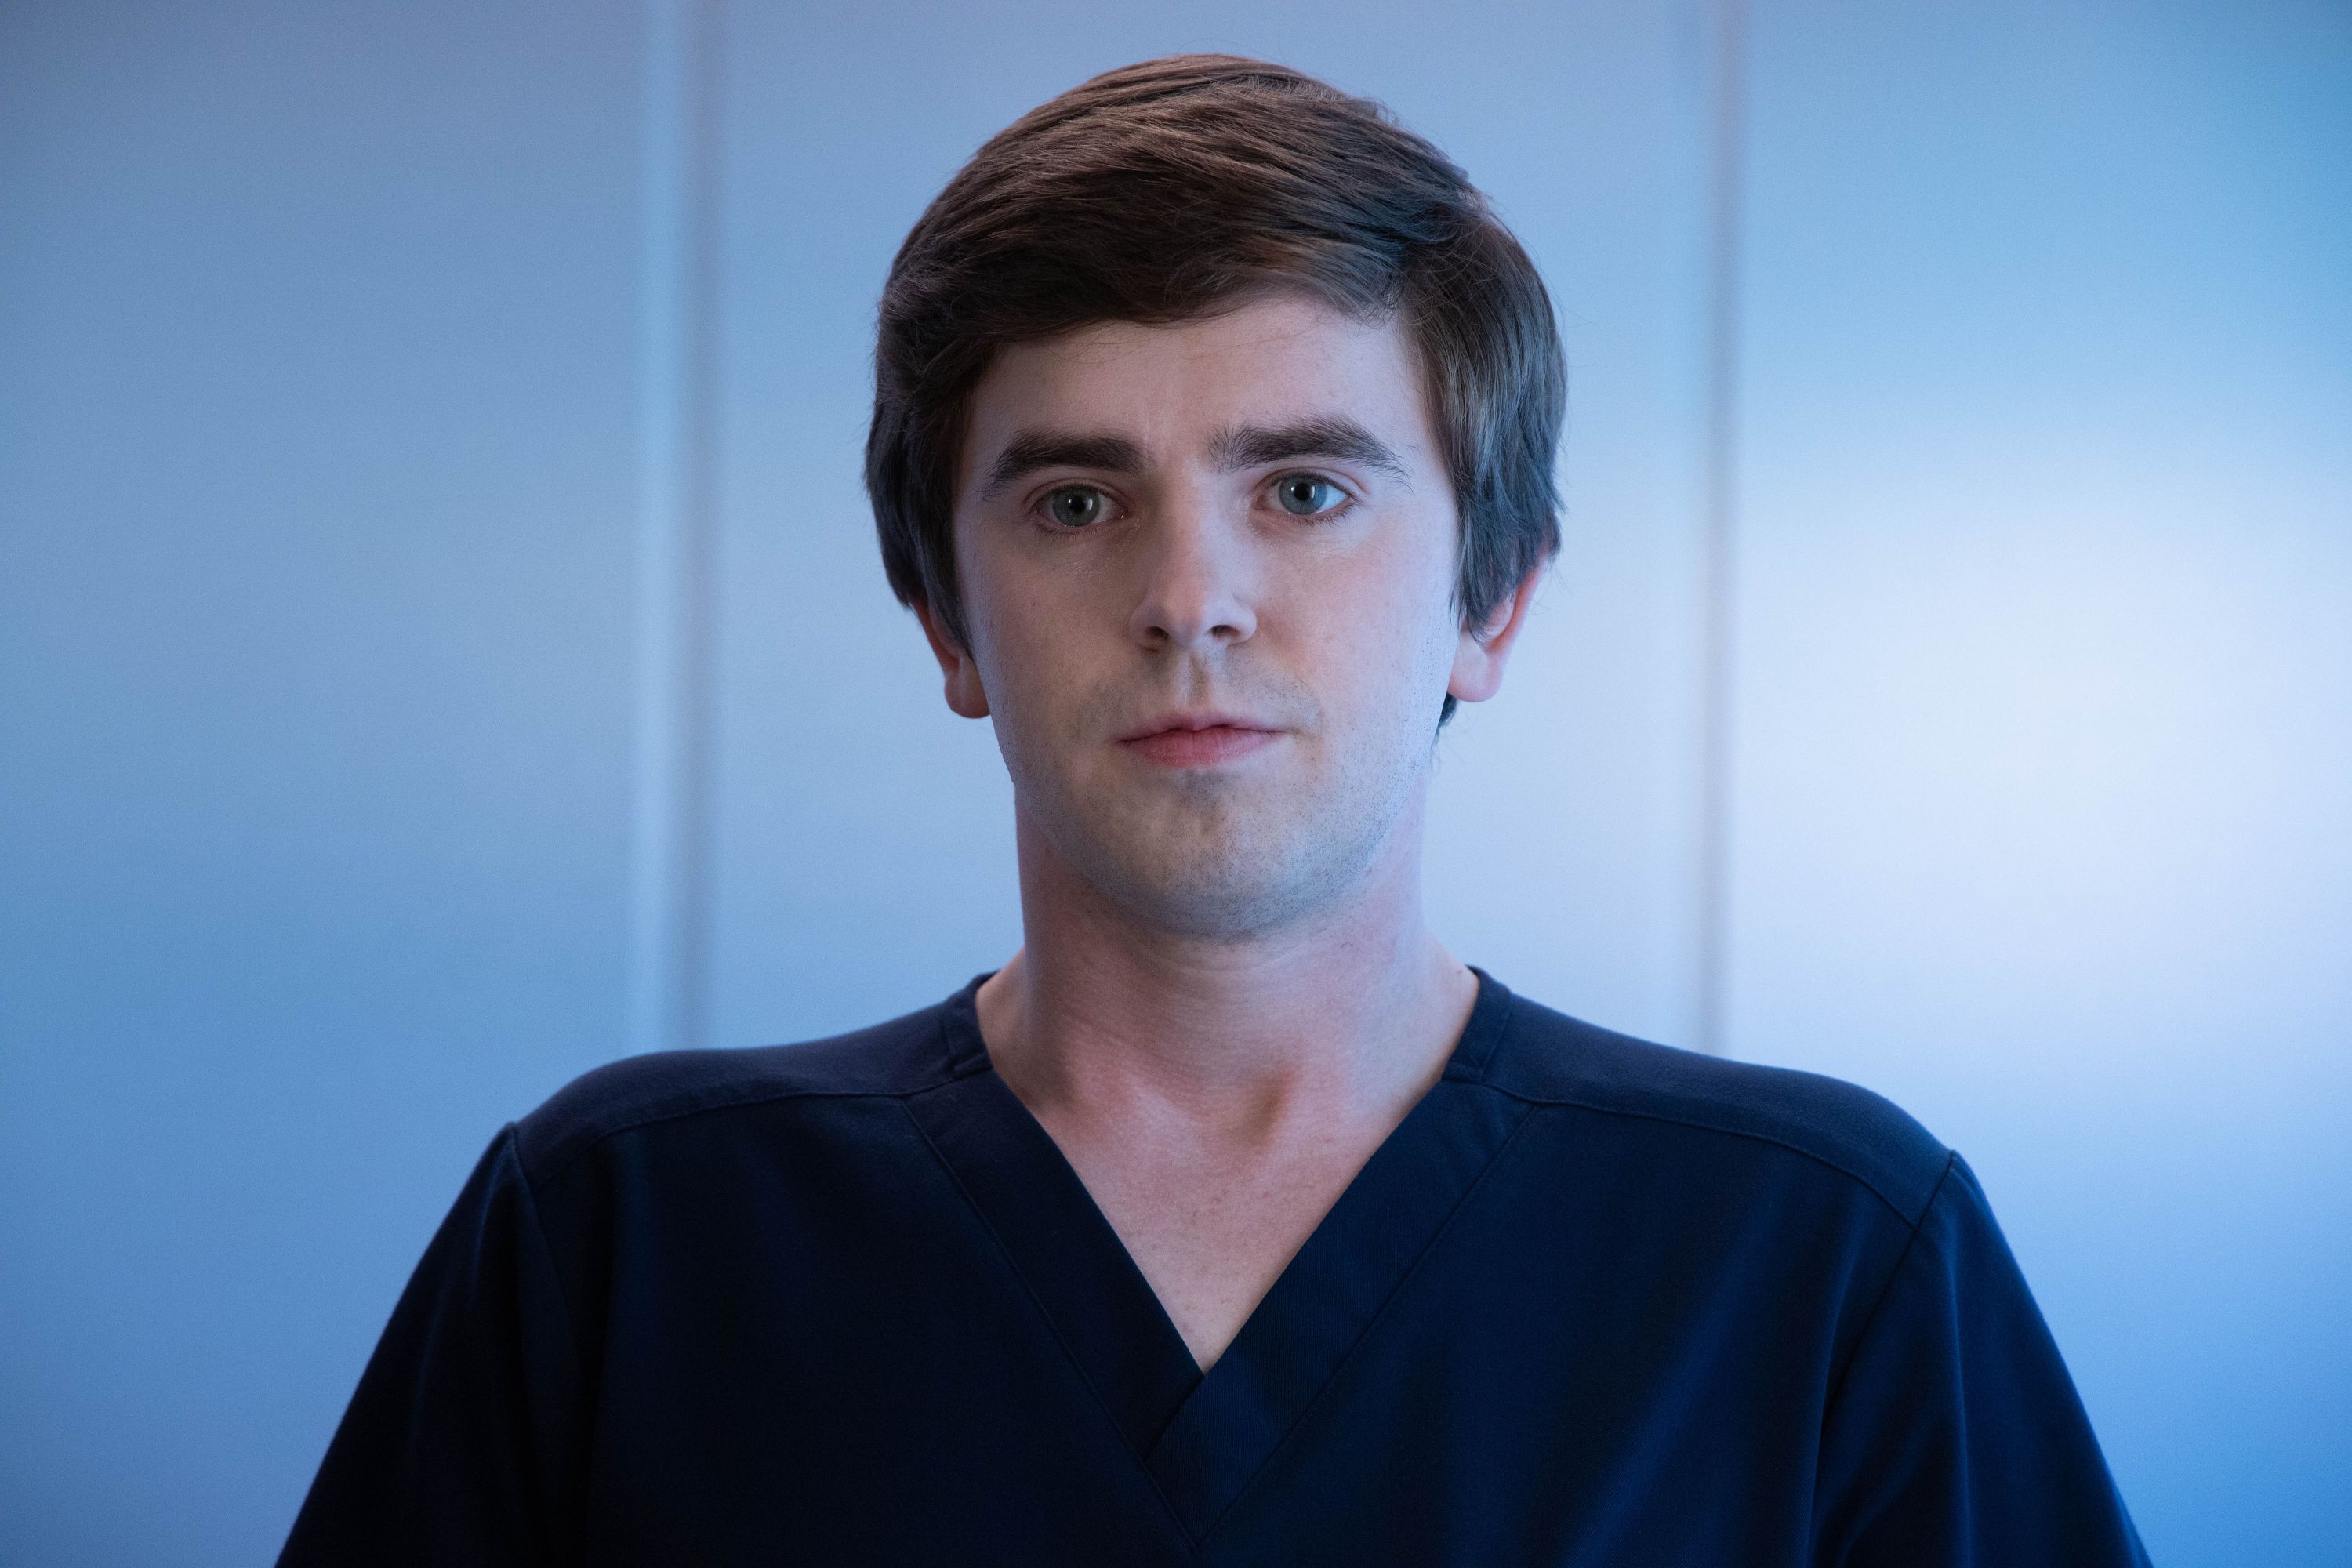 1920x1080 / 1920x1080 good doctor wallpaper hd - Coolwallpapers.me!